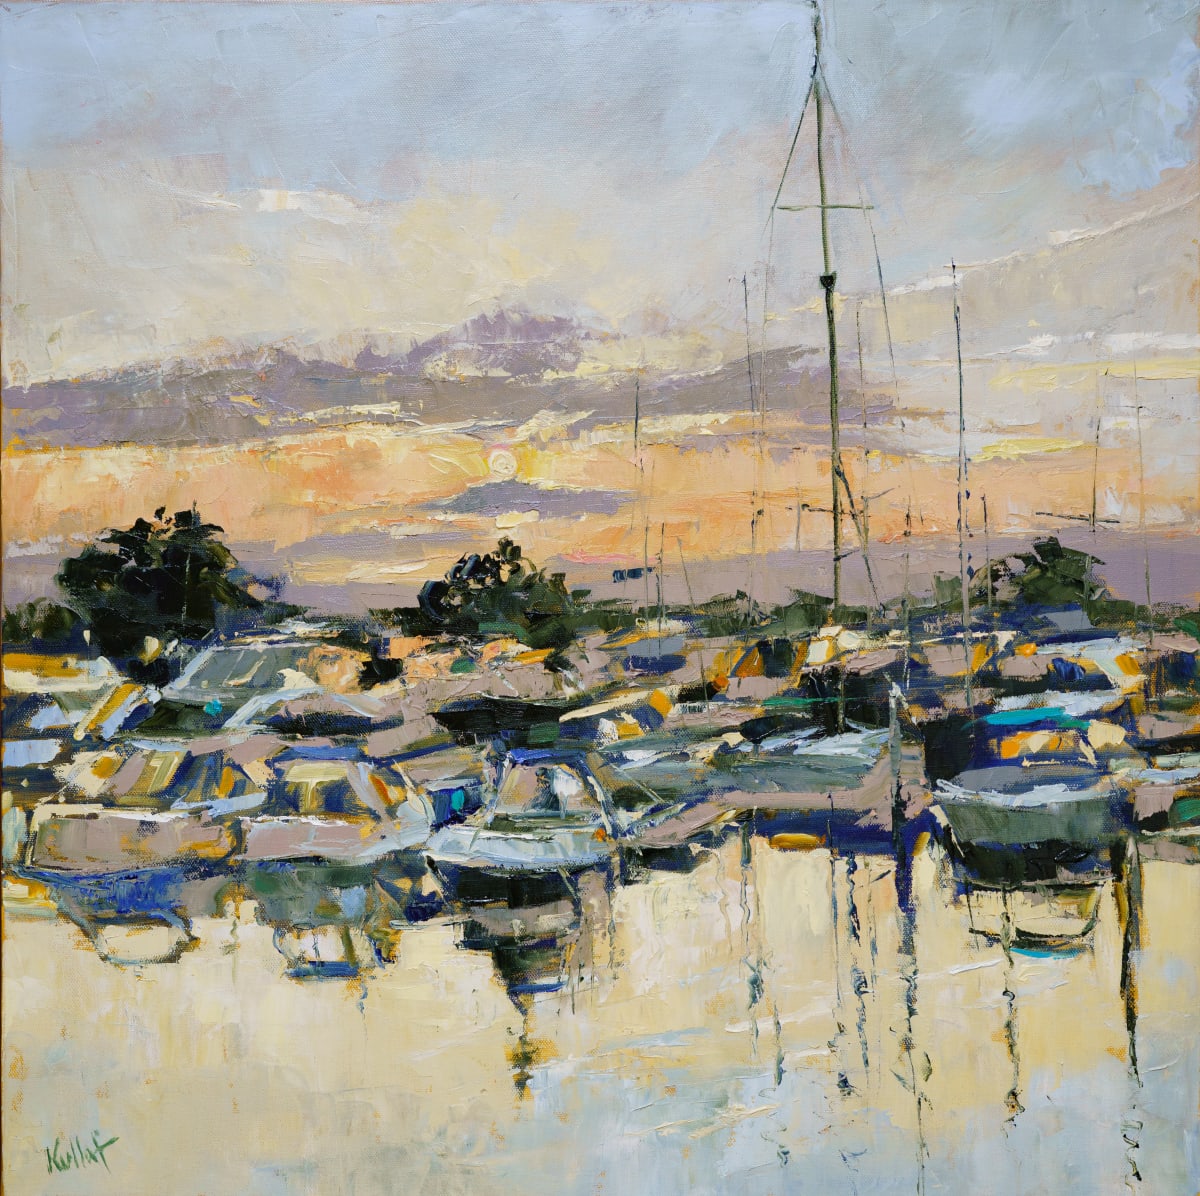 Marina at Sunset by Anne Kullaf  Image: Pastel tones of evening light reflect in the water of the marina at San Diego Bay. A warm blush of pink fades. upwards from the horizon into a purple and blue sky lit up with the last rays of the sun's yellow light.